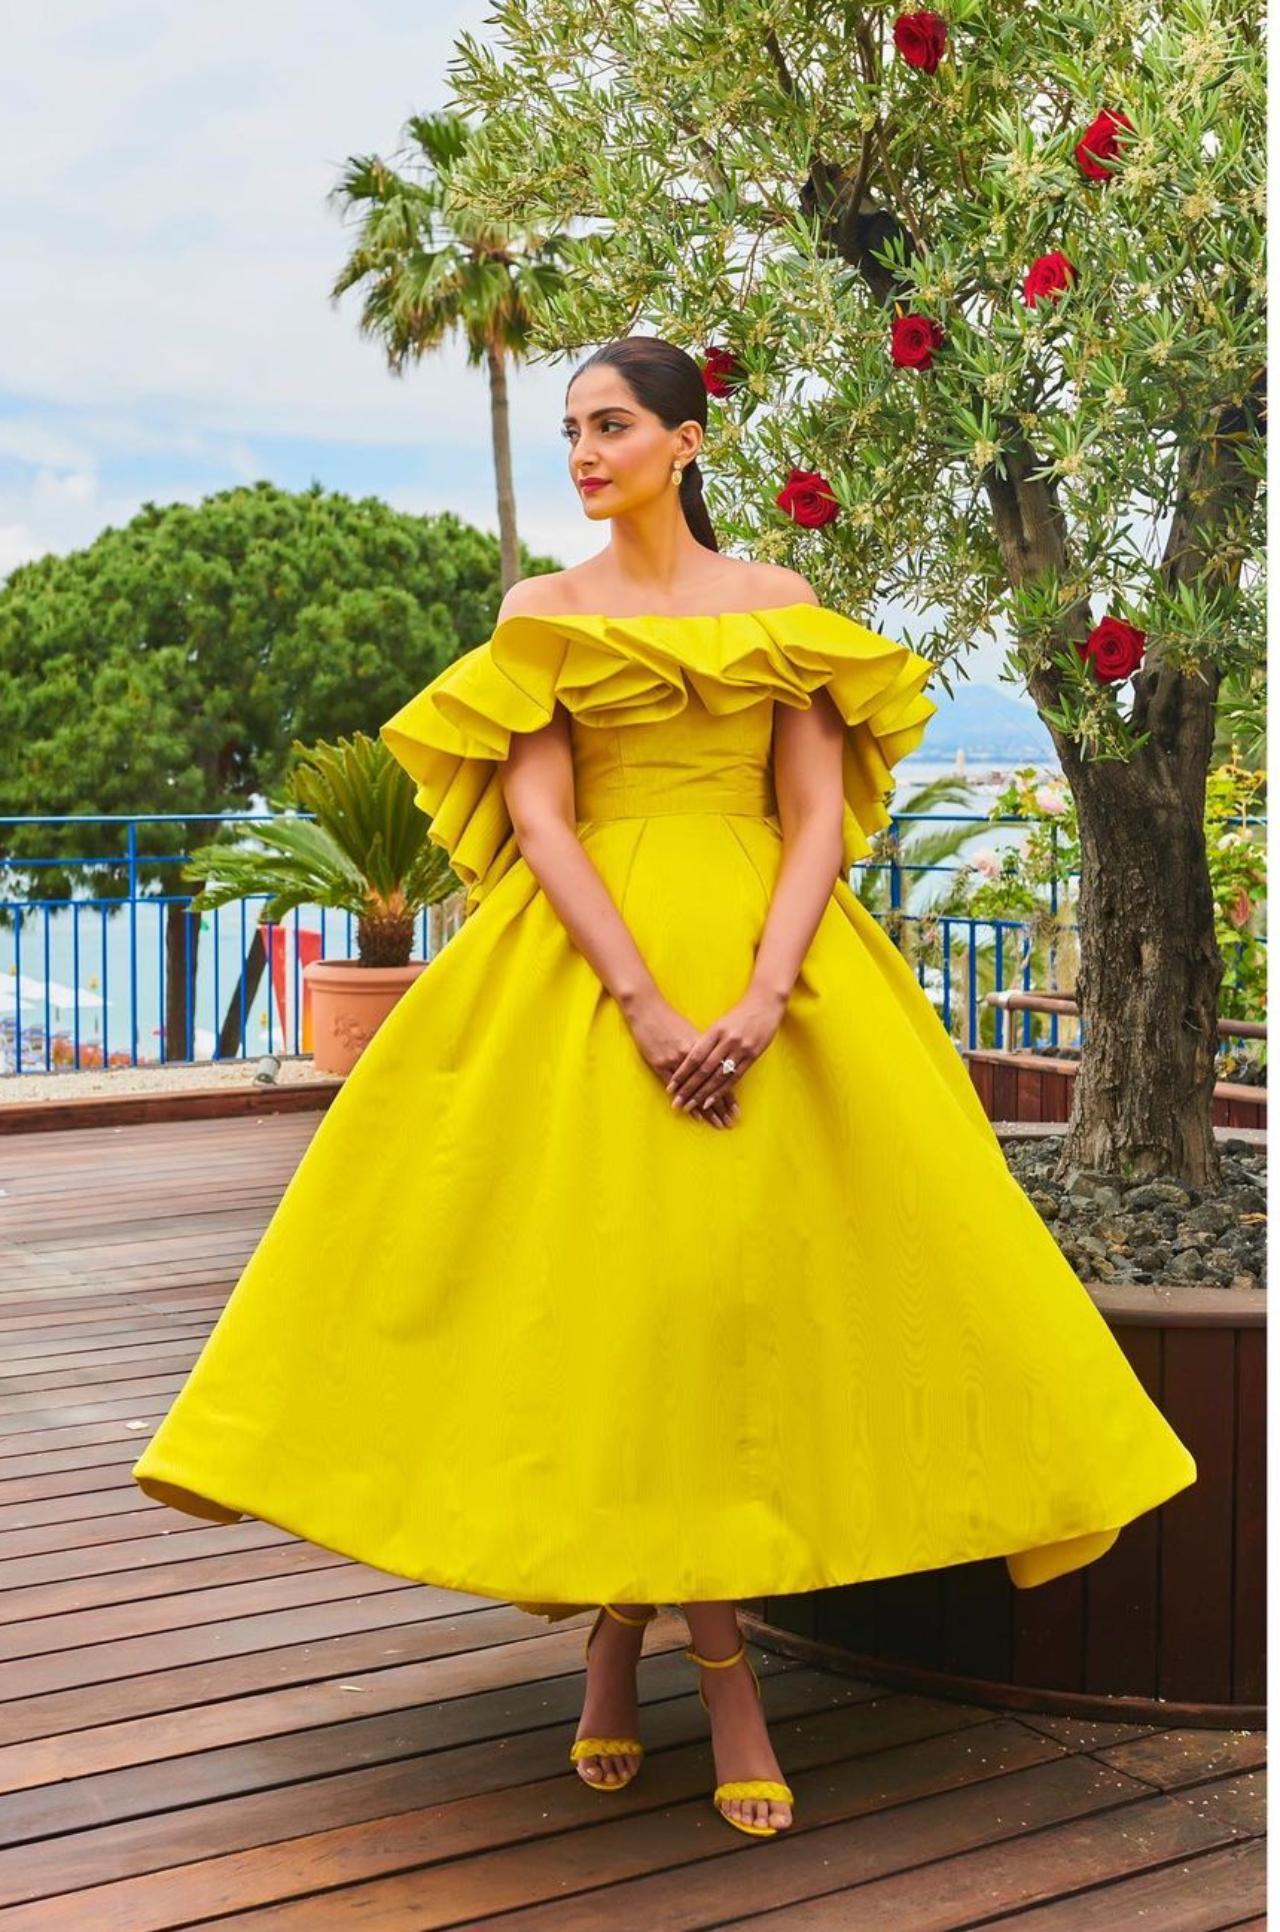 Shine in bright
Bright colours alone might sometimes be enough to boost an outfit. While slaying this vivid yellow dress with ruffles, Sonam proves this in the true sense